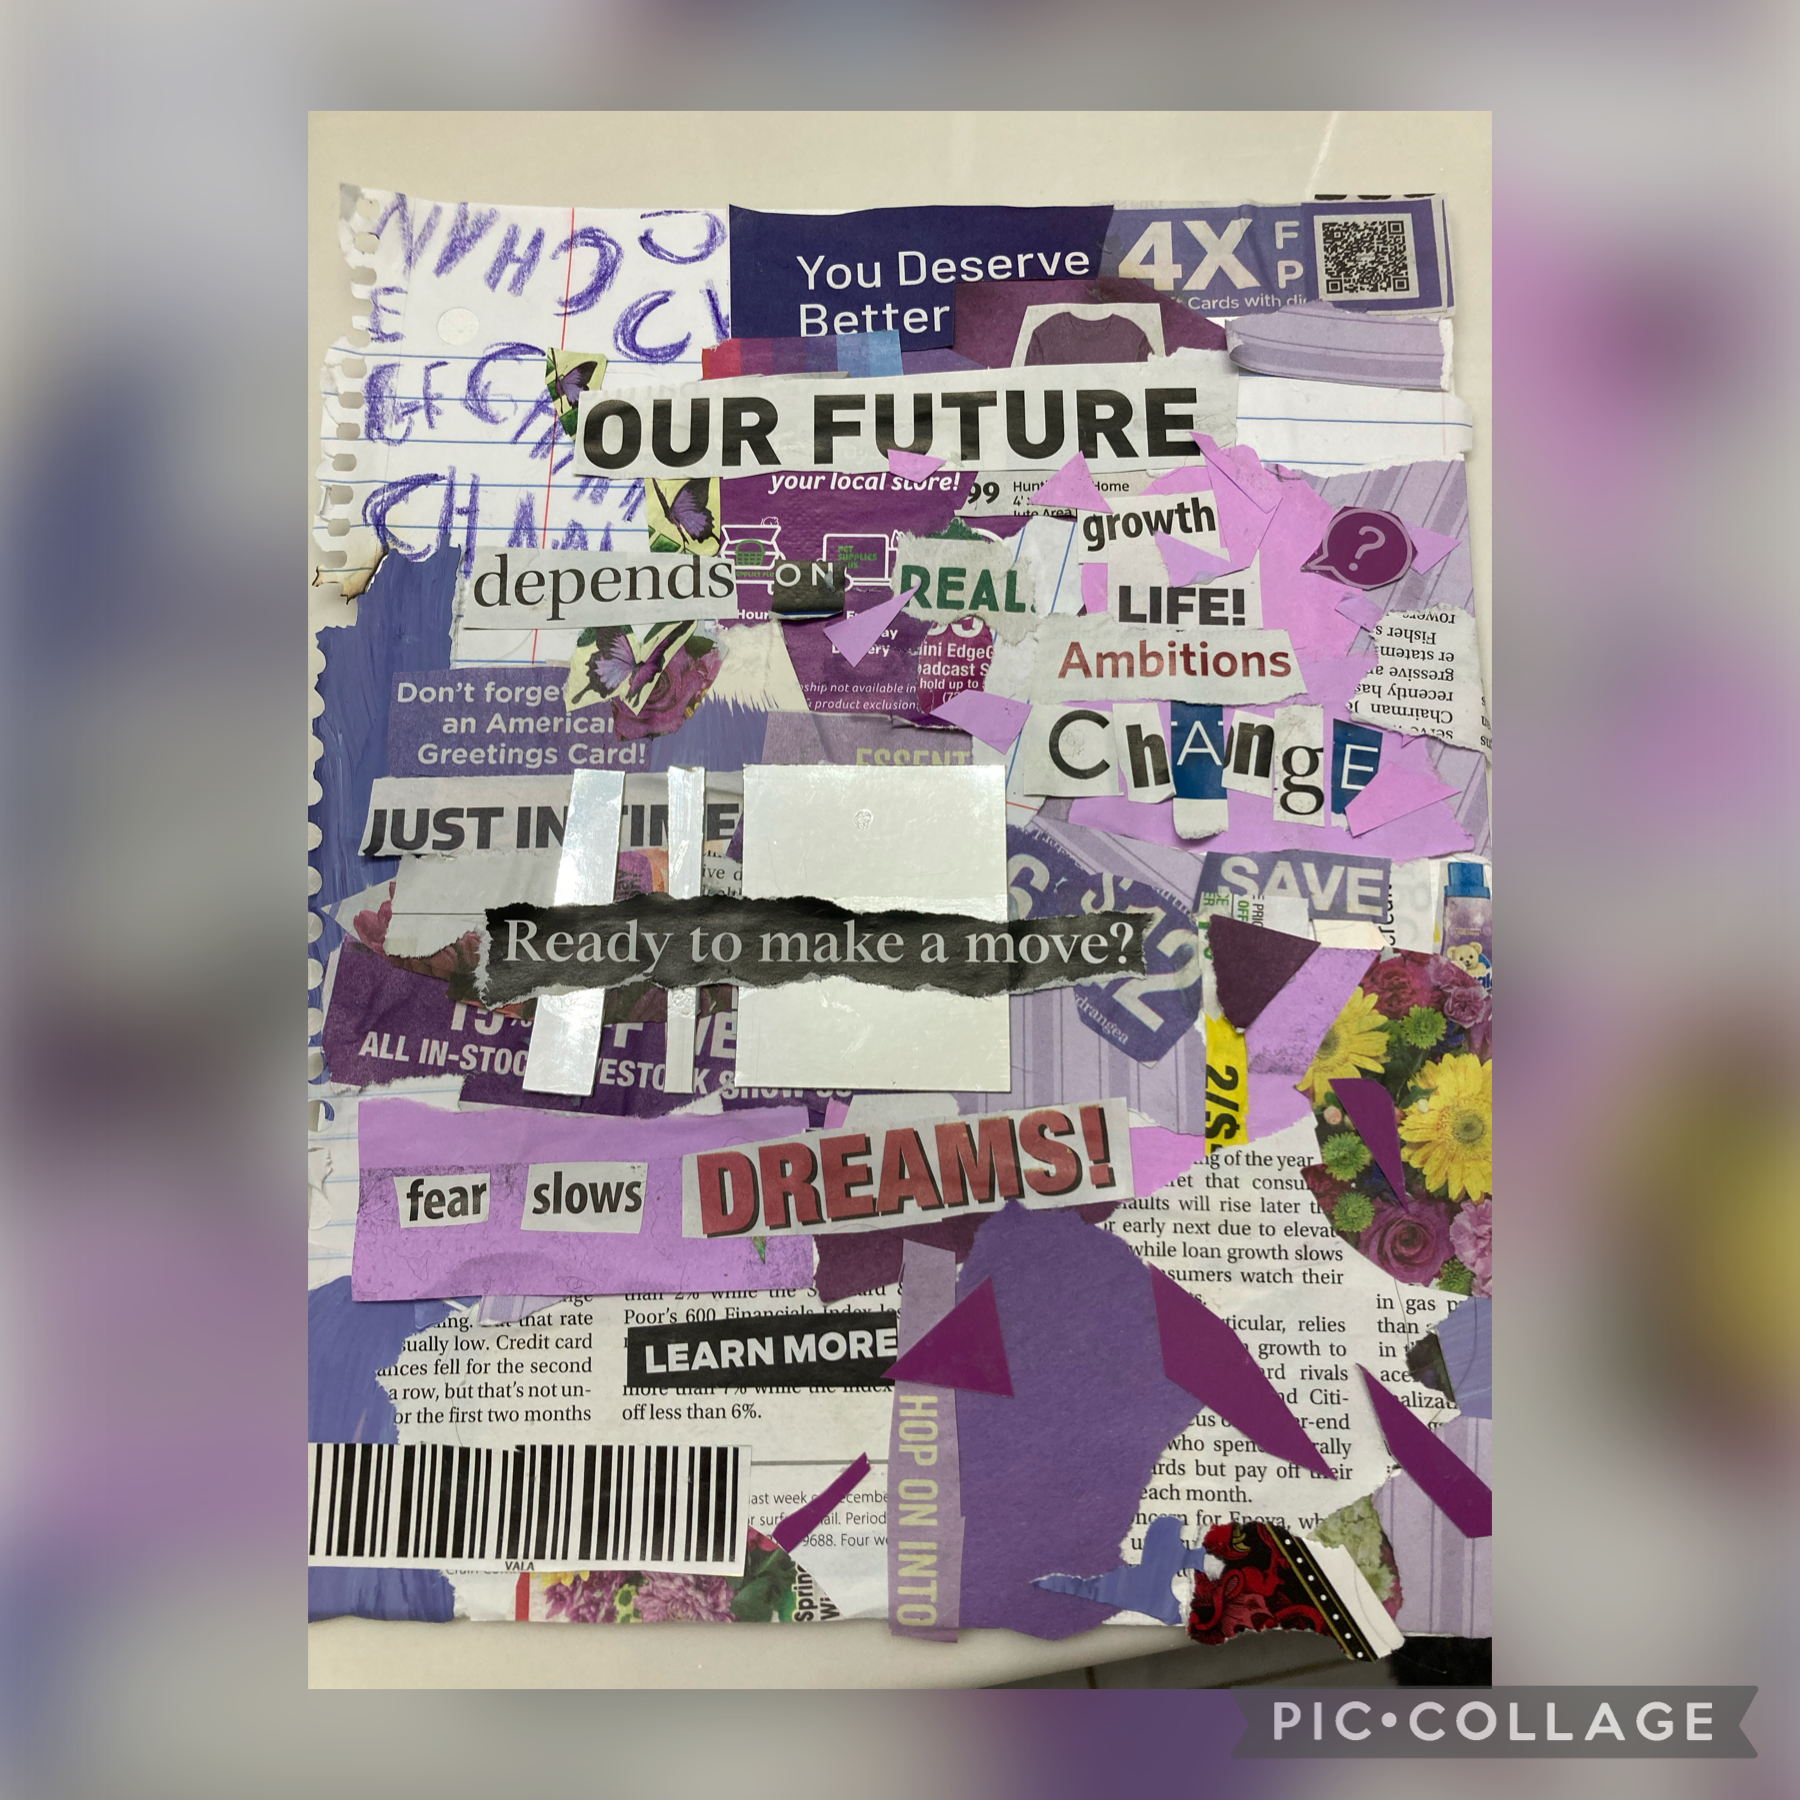 -𝕥𝕒𝕡-

“Our future depends on REAL growth, life, ambitions, and change”
Well, pic collage is for posting collage’s, I randomly decided to make a real one, also jumped to 22 🤭